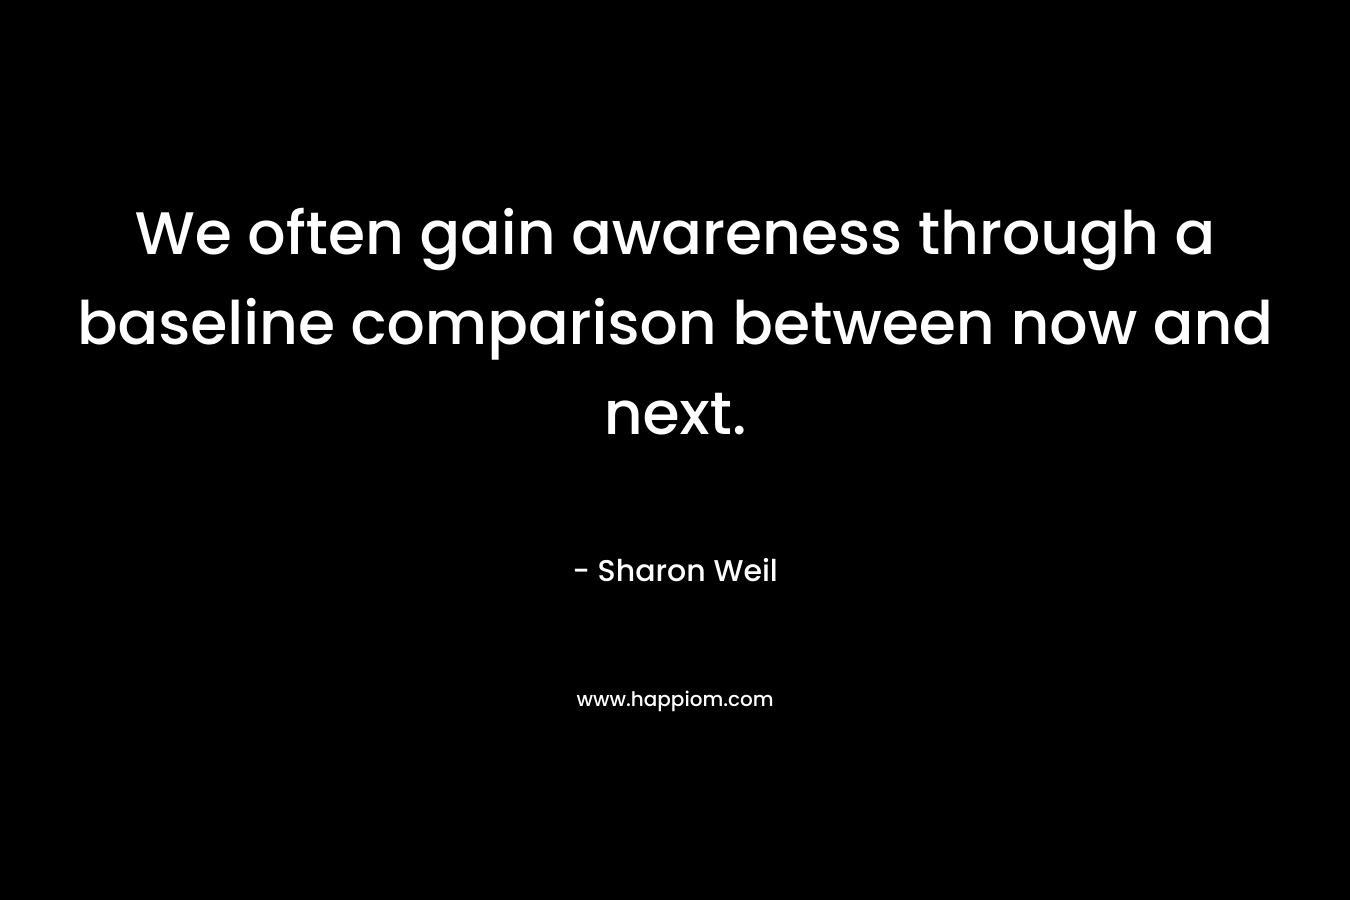 We often gain awareness through a baseline comparison between now and next. – Sharon Weil